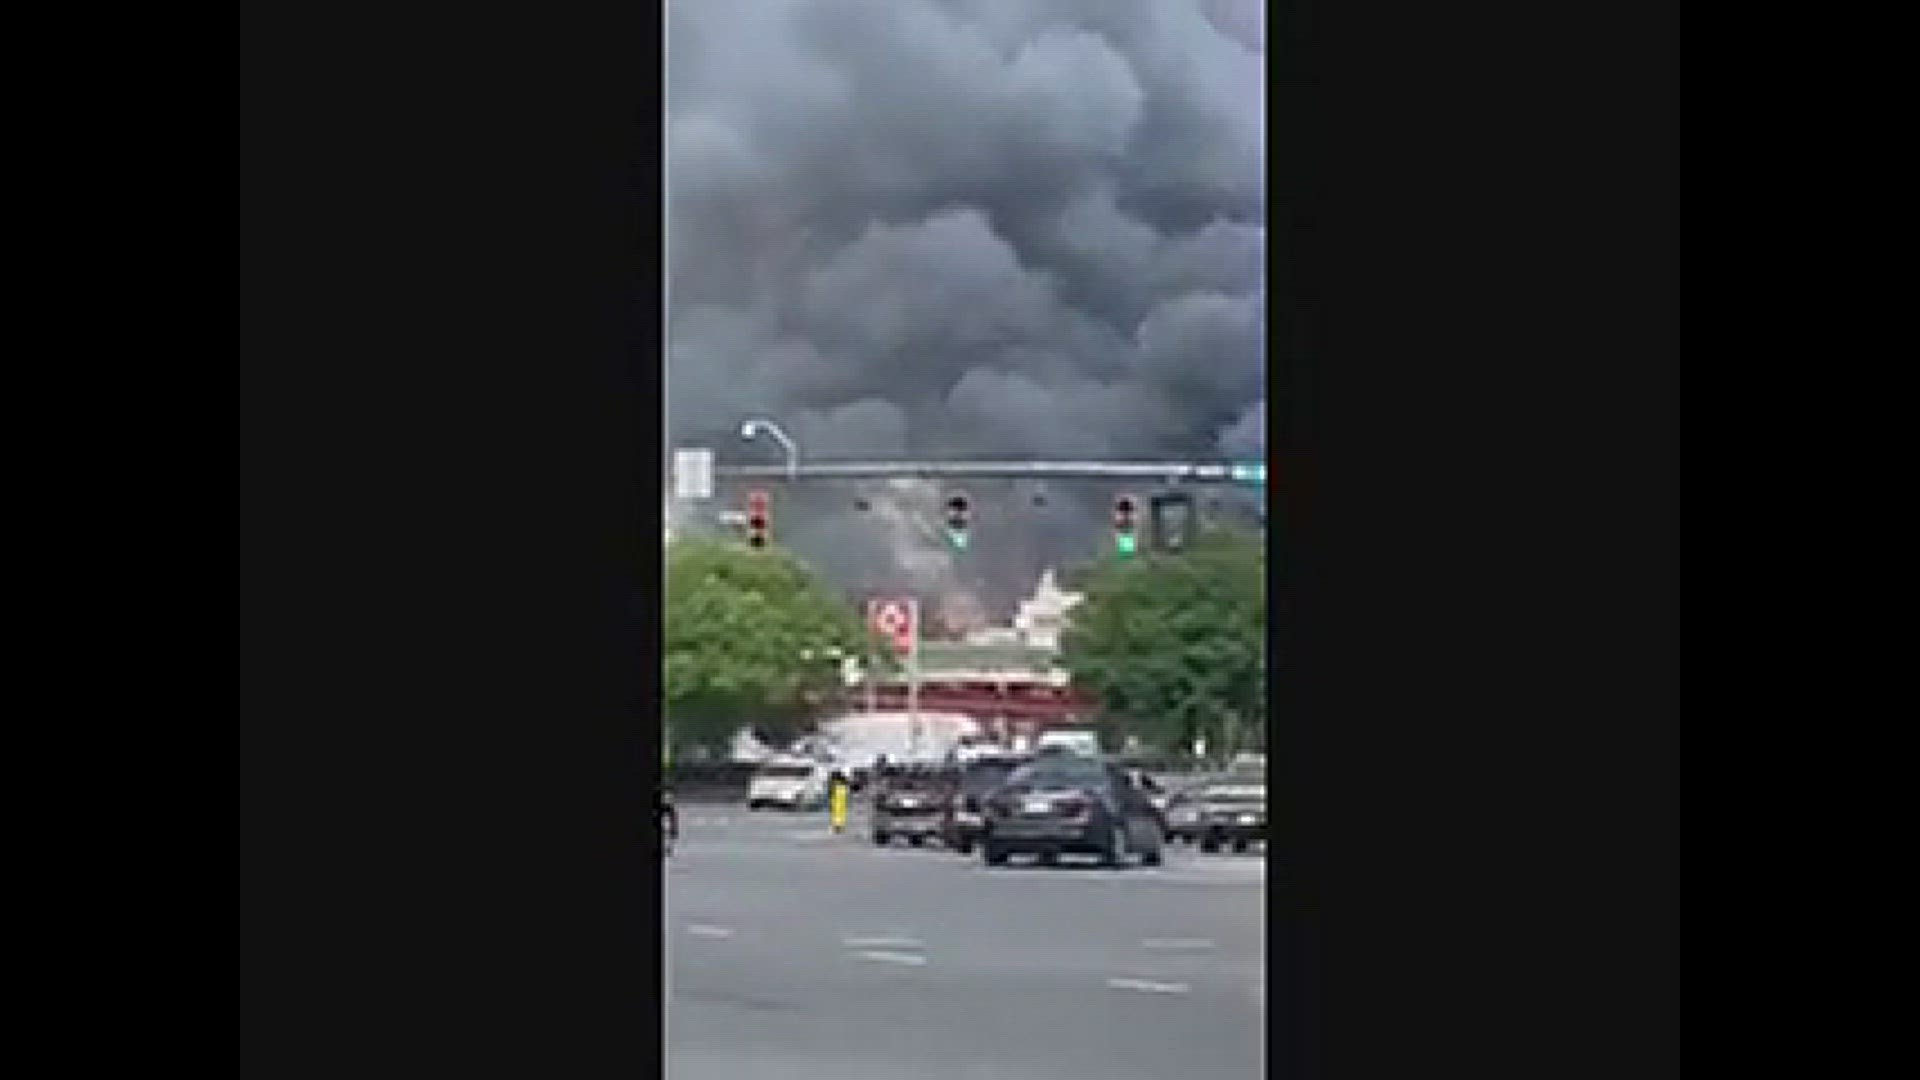 Massive smoke from SouthPark area fire in Charlotte
Credit: WCNC Charlotte viewer